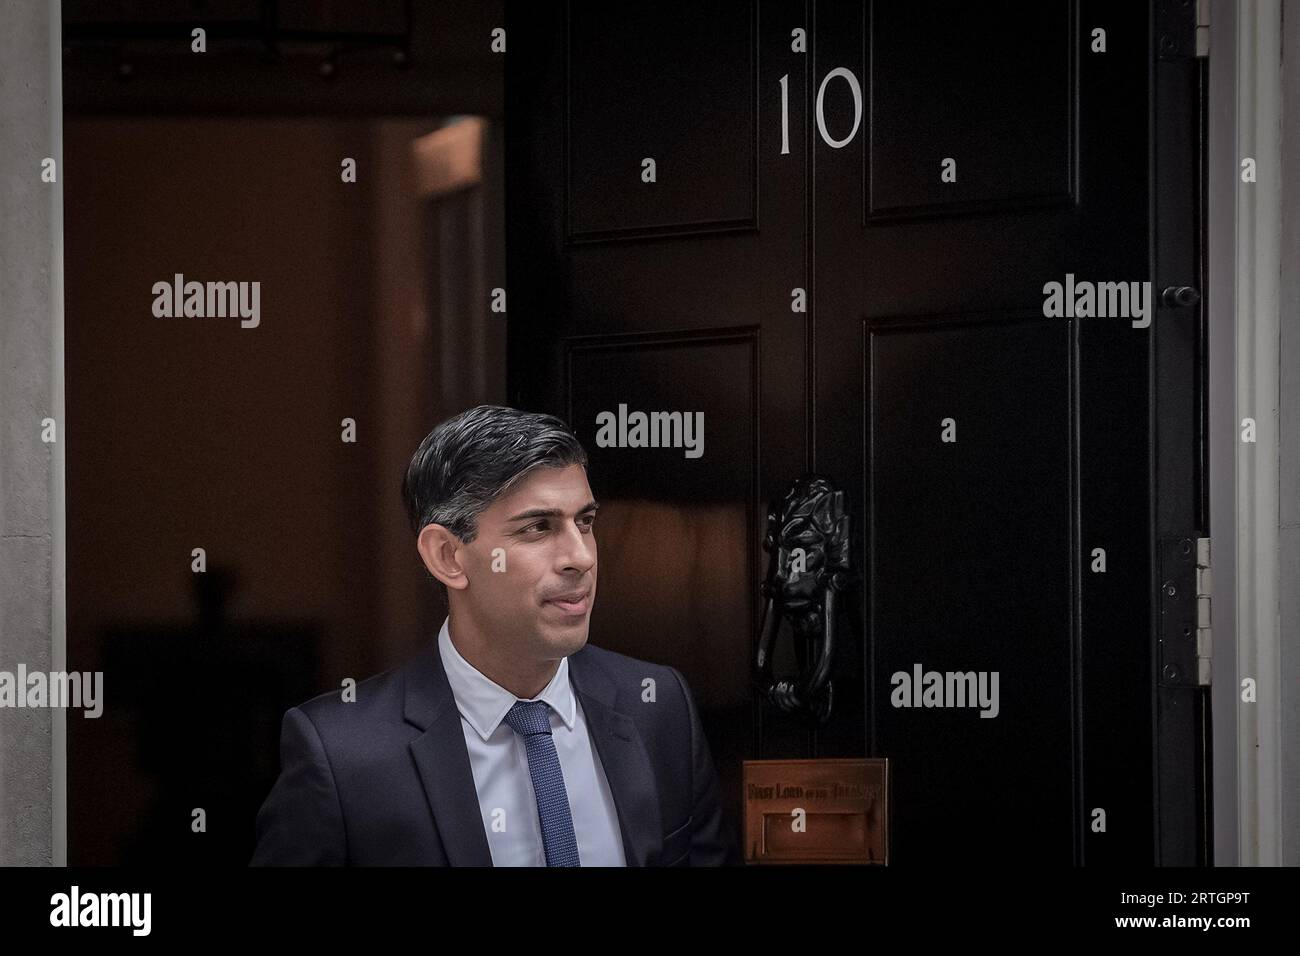 London, UK. 13th September 2023. Prime Minister Rishi Sunak leaves No.10 Downing Street for weekly questions in Parliament to include raising a motion to include the Russian paramilitary group Wagner on the UK’s list of terrorist organizations. Credit: Guy Corbishley/Alamy Live News Stock Photo